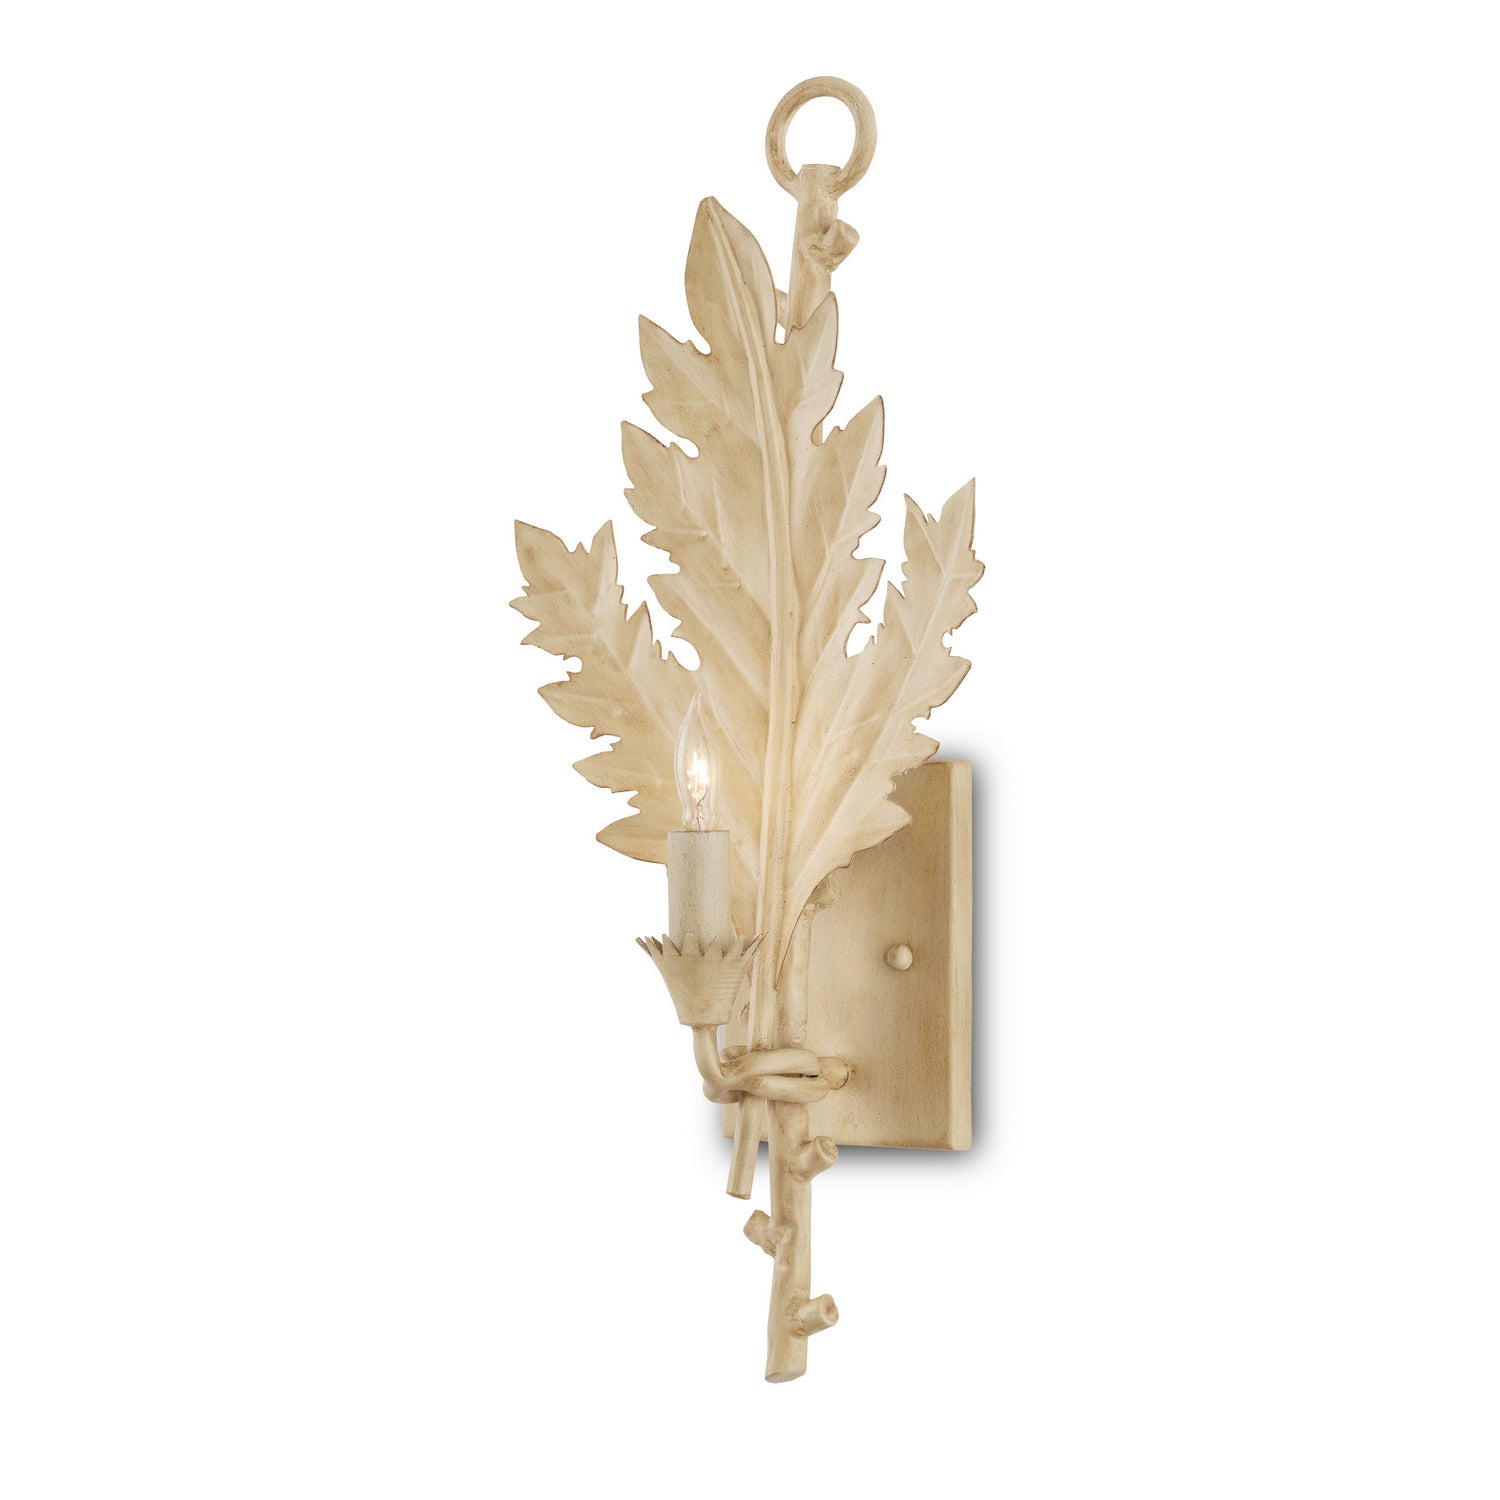 One Light Wall Sconce from the Bowthorpe collection in Coco Cream finish